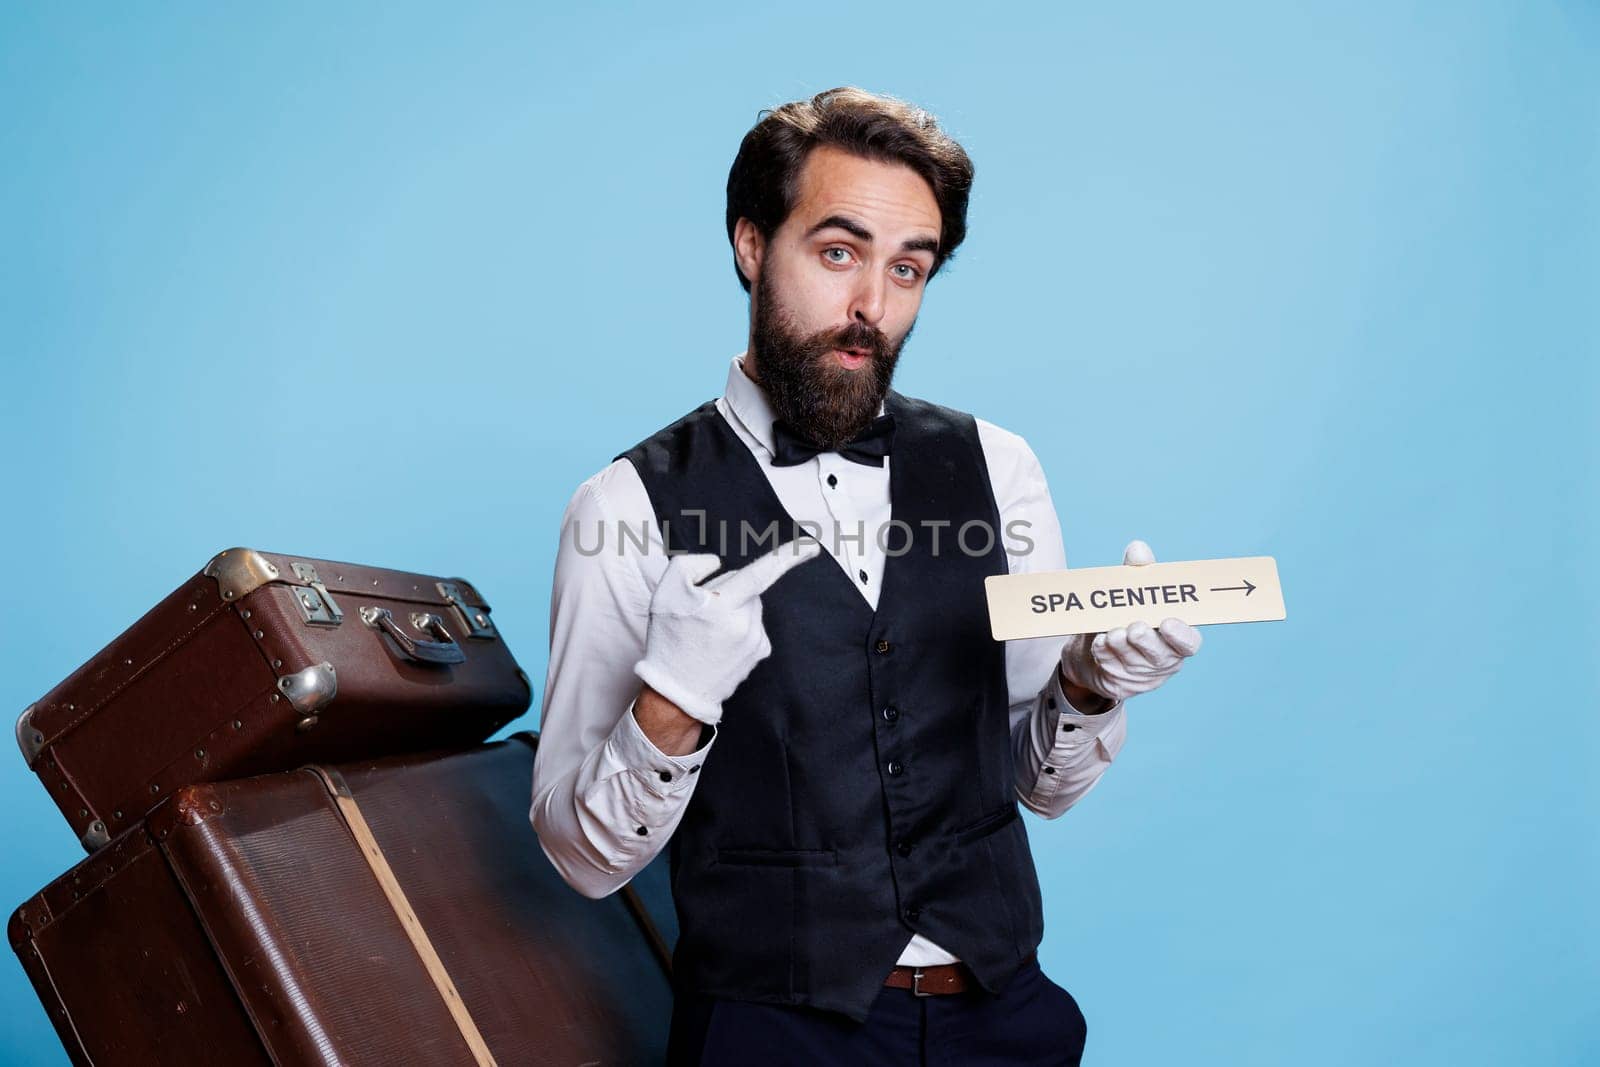 Confident bellboy uses spa center sign to direct guests and show all hotel locations, hospitality industry. Stylish skilled worker holding indicator or pointer for the relaxation area.